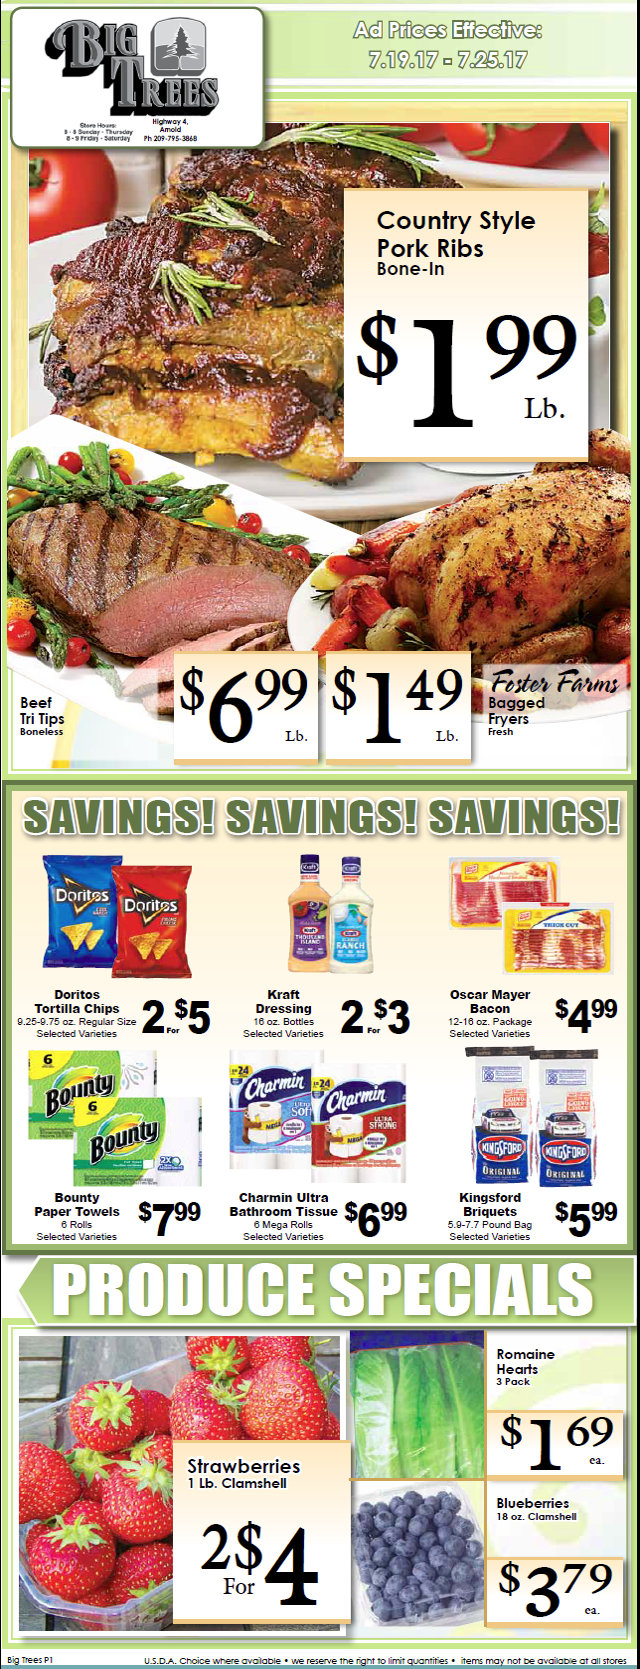 Big Trees Market Weekly Ad & Specials Through July 25th